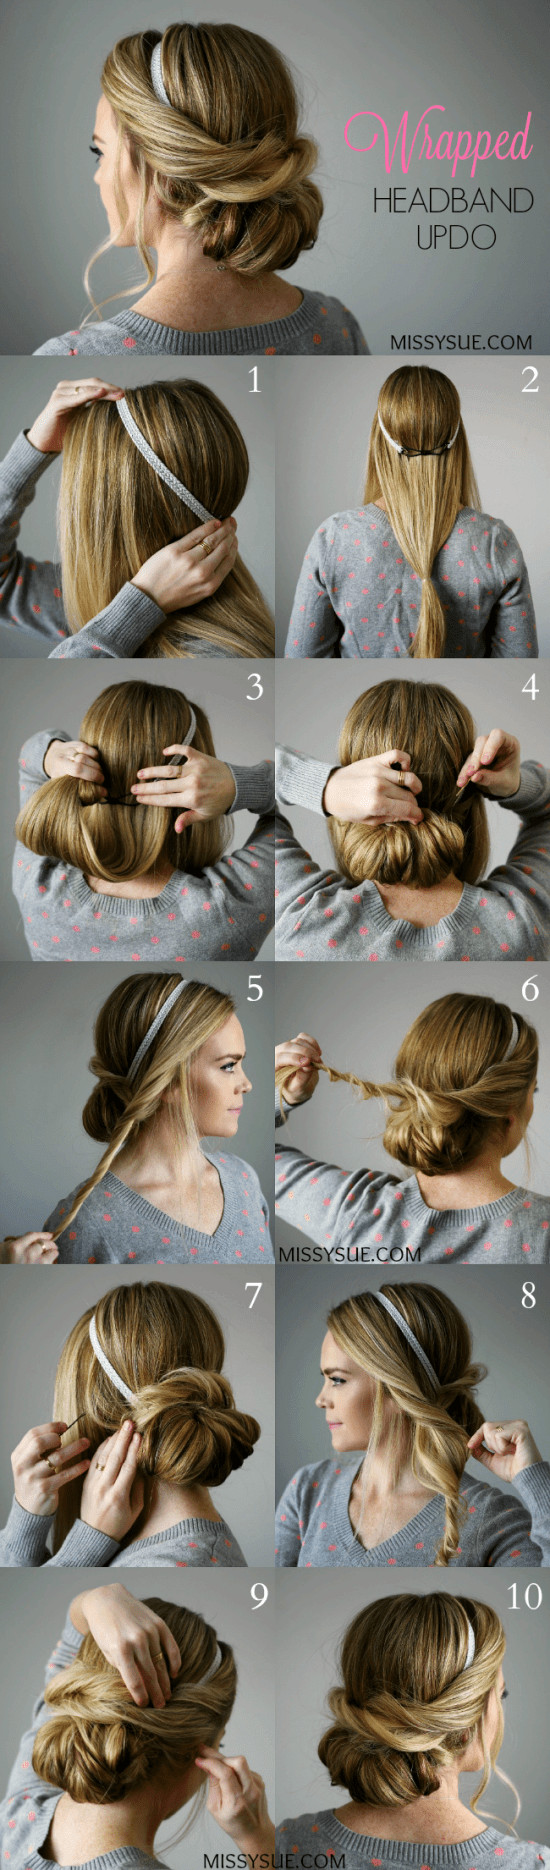 Easy DIY Updos For Long Hair
 15 Easy Prom Hairstyles for Long Hair You Can DIY At Home